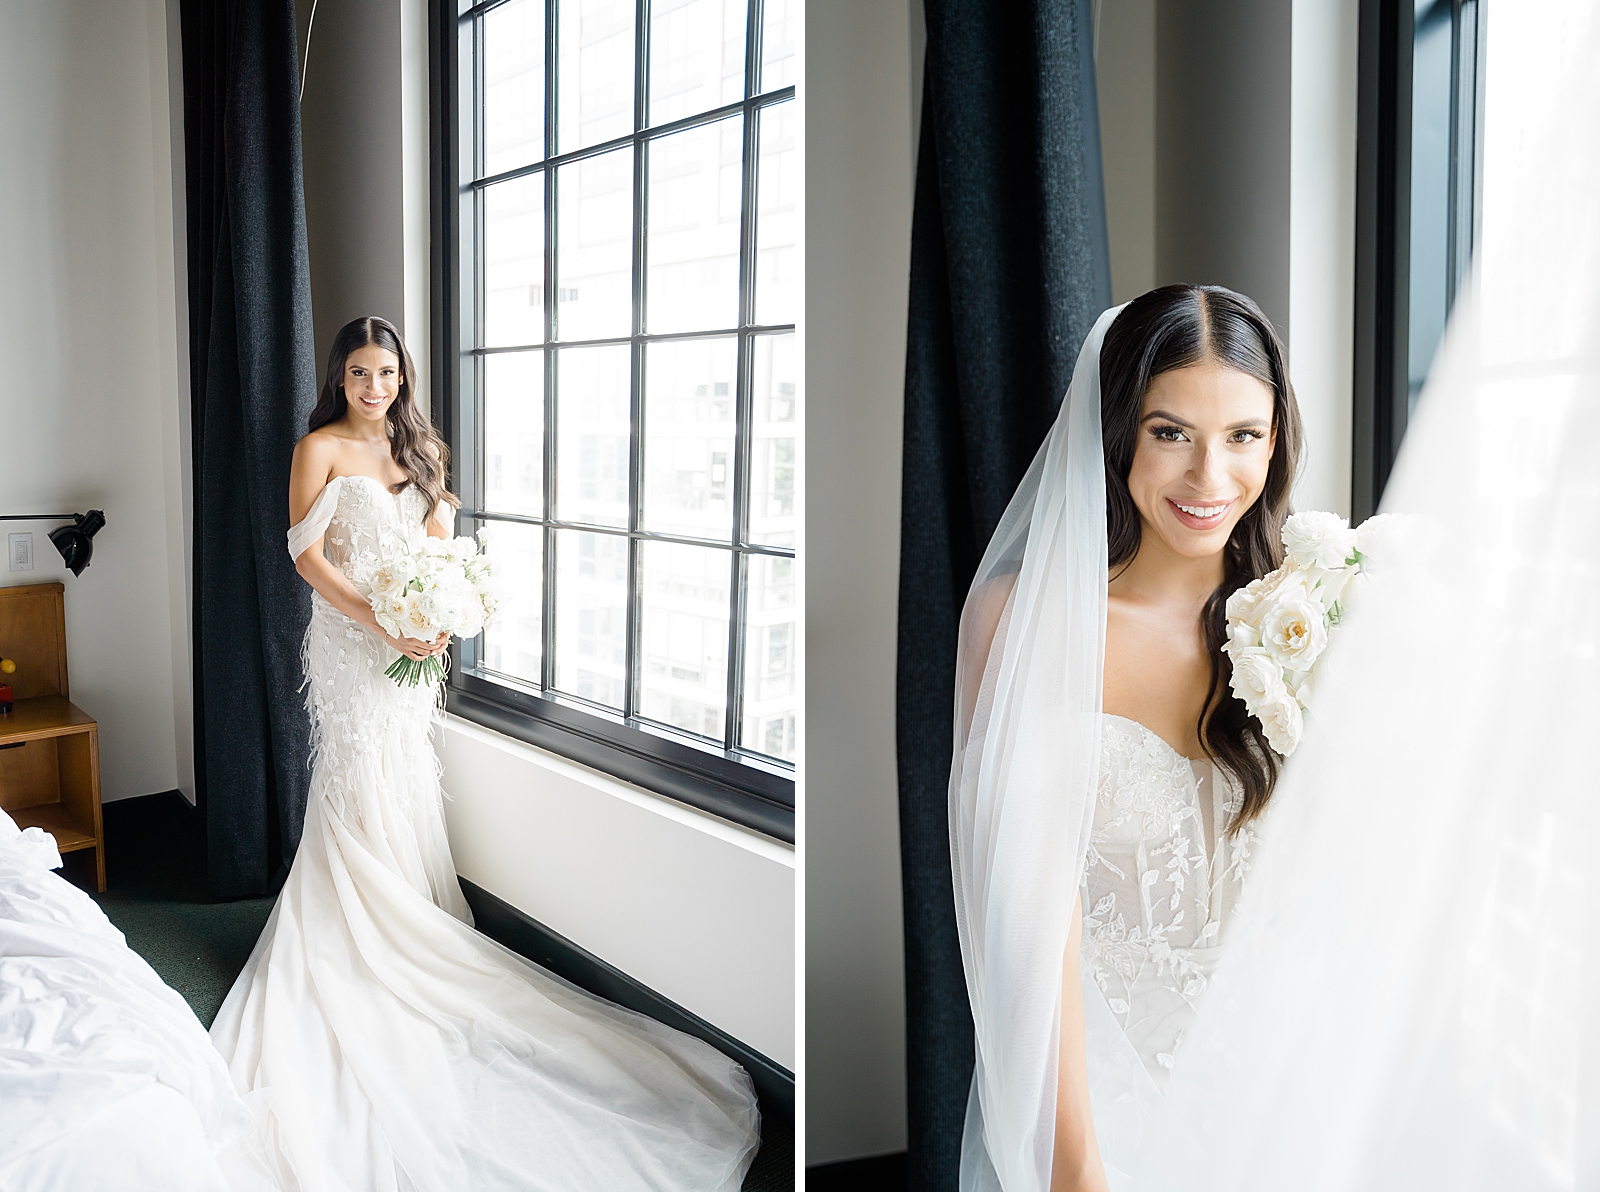 Left photo: Full body shot of the bride in her wedding gown and holding her bouquet. 
Right photo: Upper body shot of the bride in her wedding gown smiling for the camera.